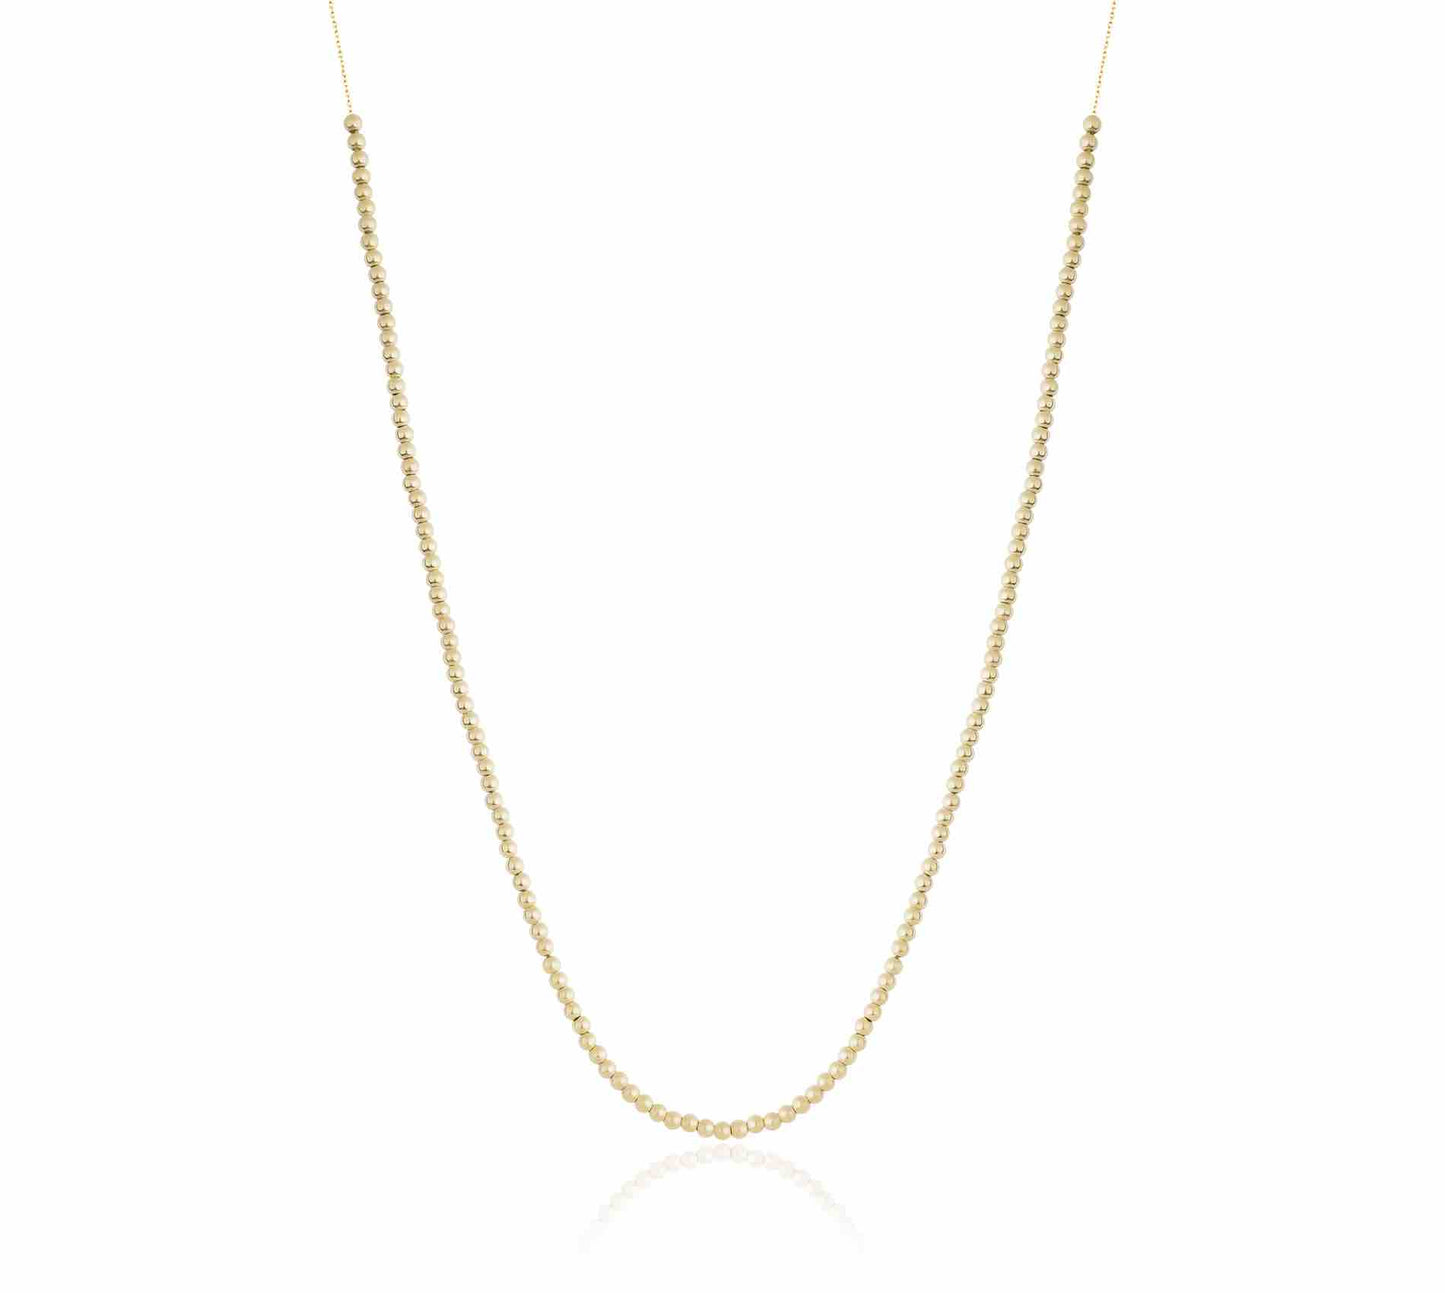 Femina, Gold Chain Necklace, Gold Necklace, Gold Jewelry, Gold Chains